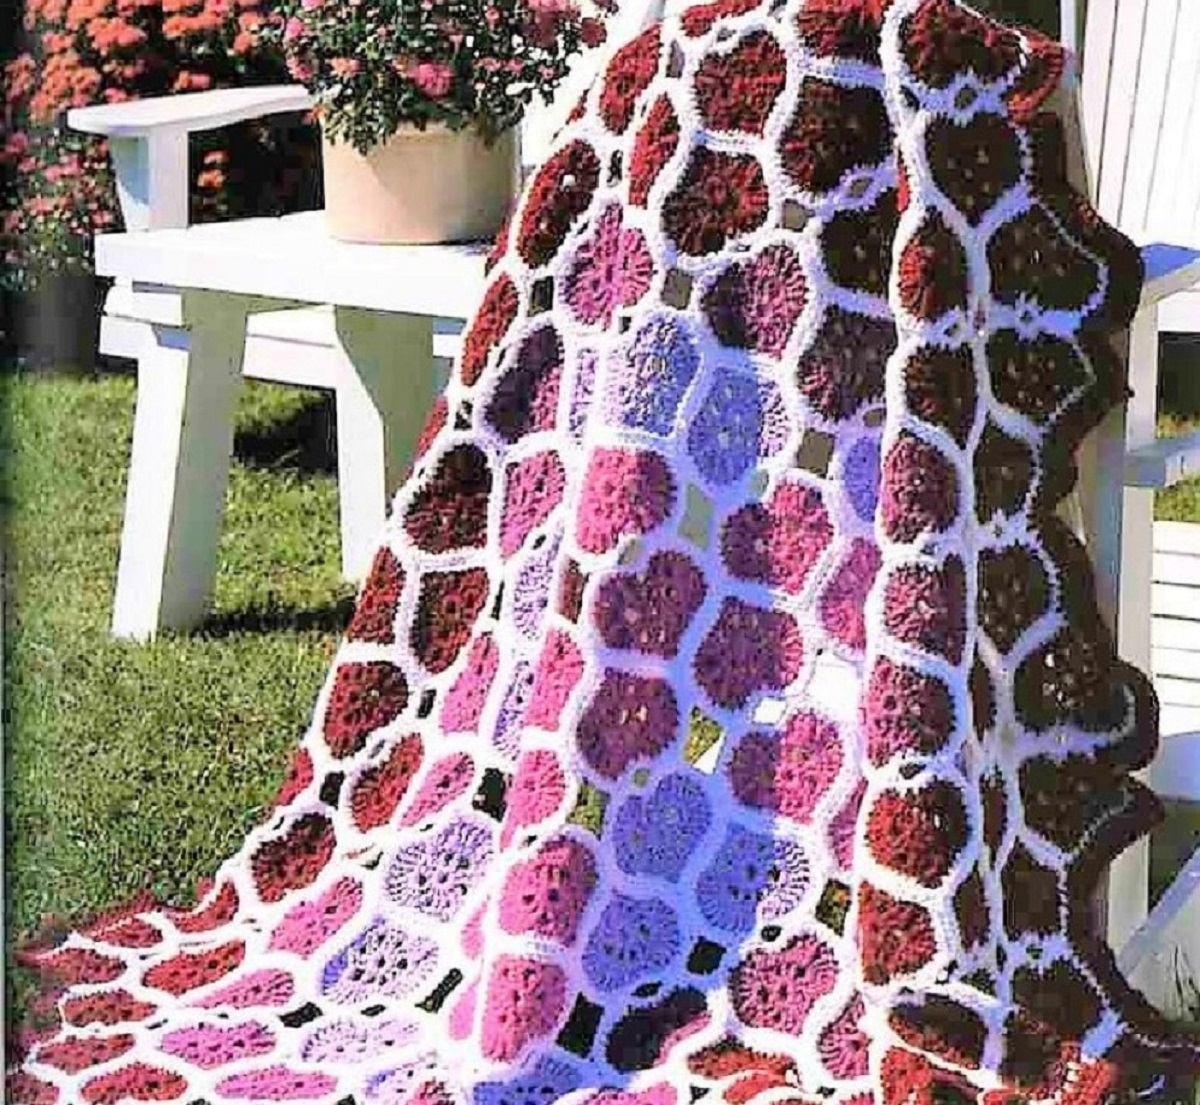 Large white crochet Afghan withered, purple, and pink hearts with a white trim all over the blanket draped over a white garden chair.